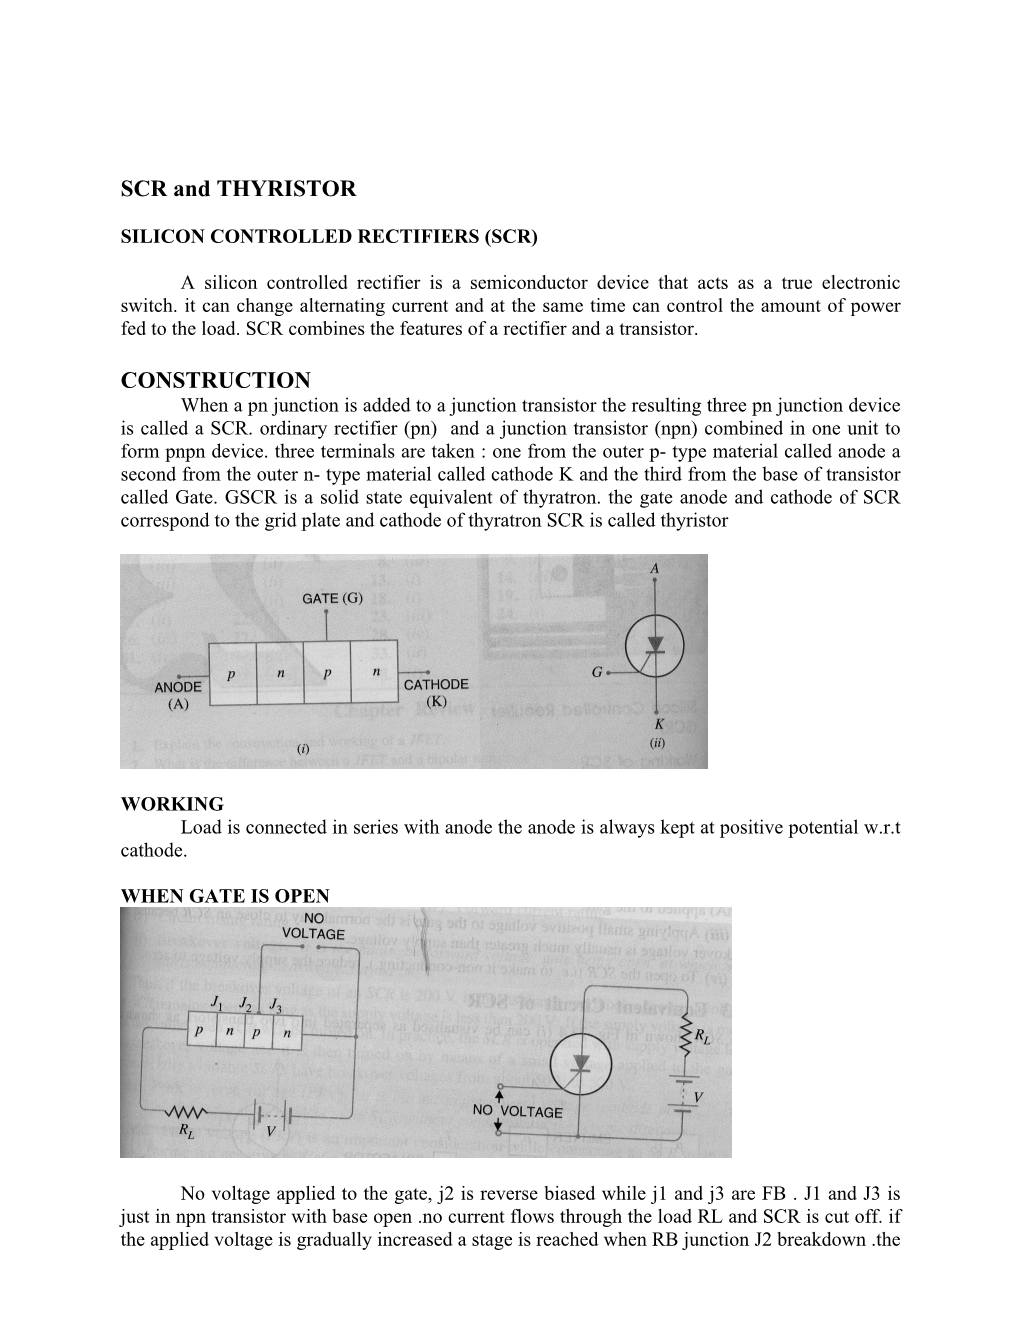 SCR and THYRISTOR CONSTRUCTION